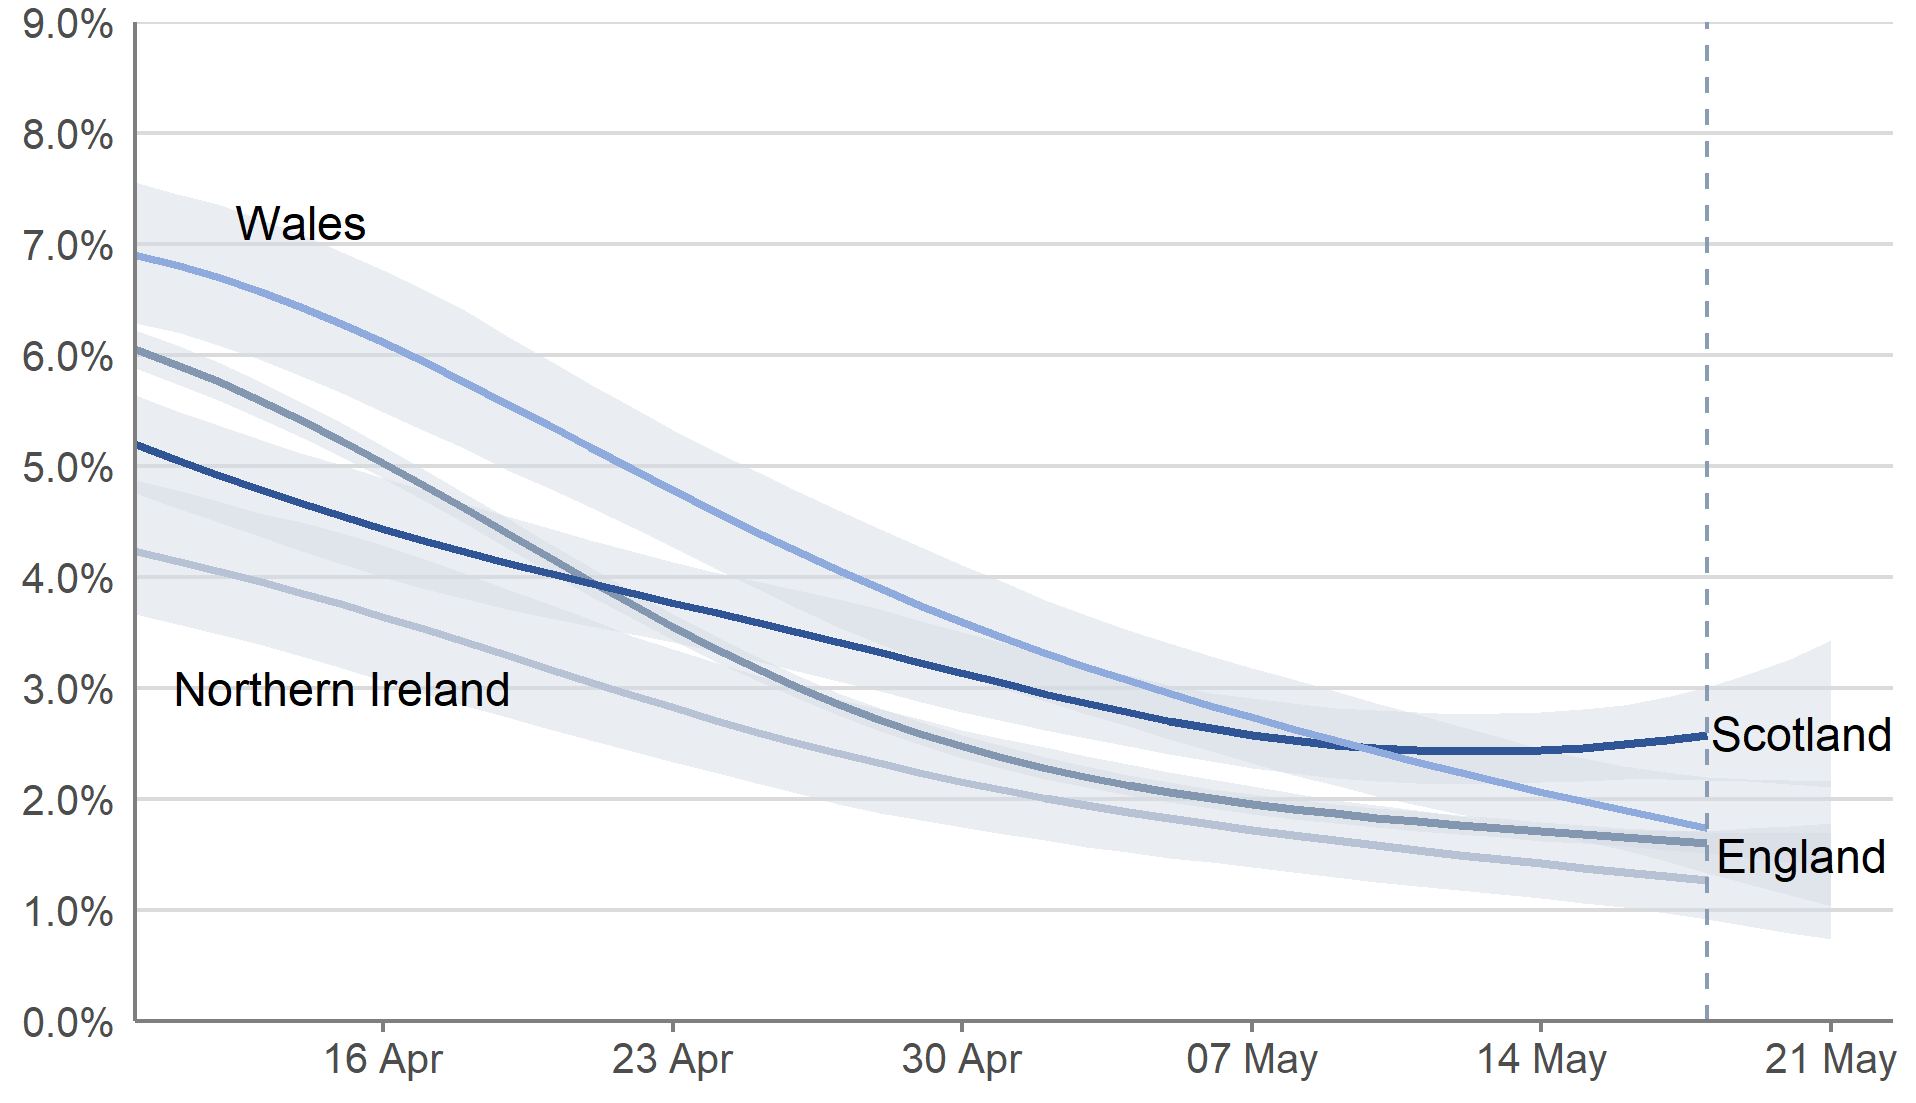 In the most recent week from 15 to 21 May 2022, the percentage of people testing positive for COVID-19 continued to decrease in England, Wales and Northern Ireland, and the trend was uncertain in Scotland.